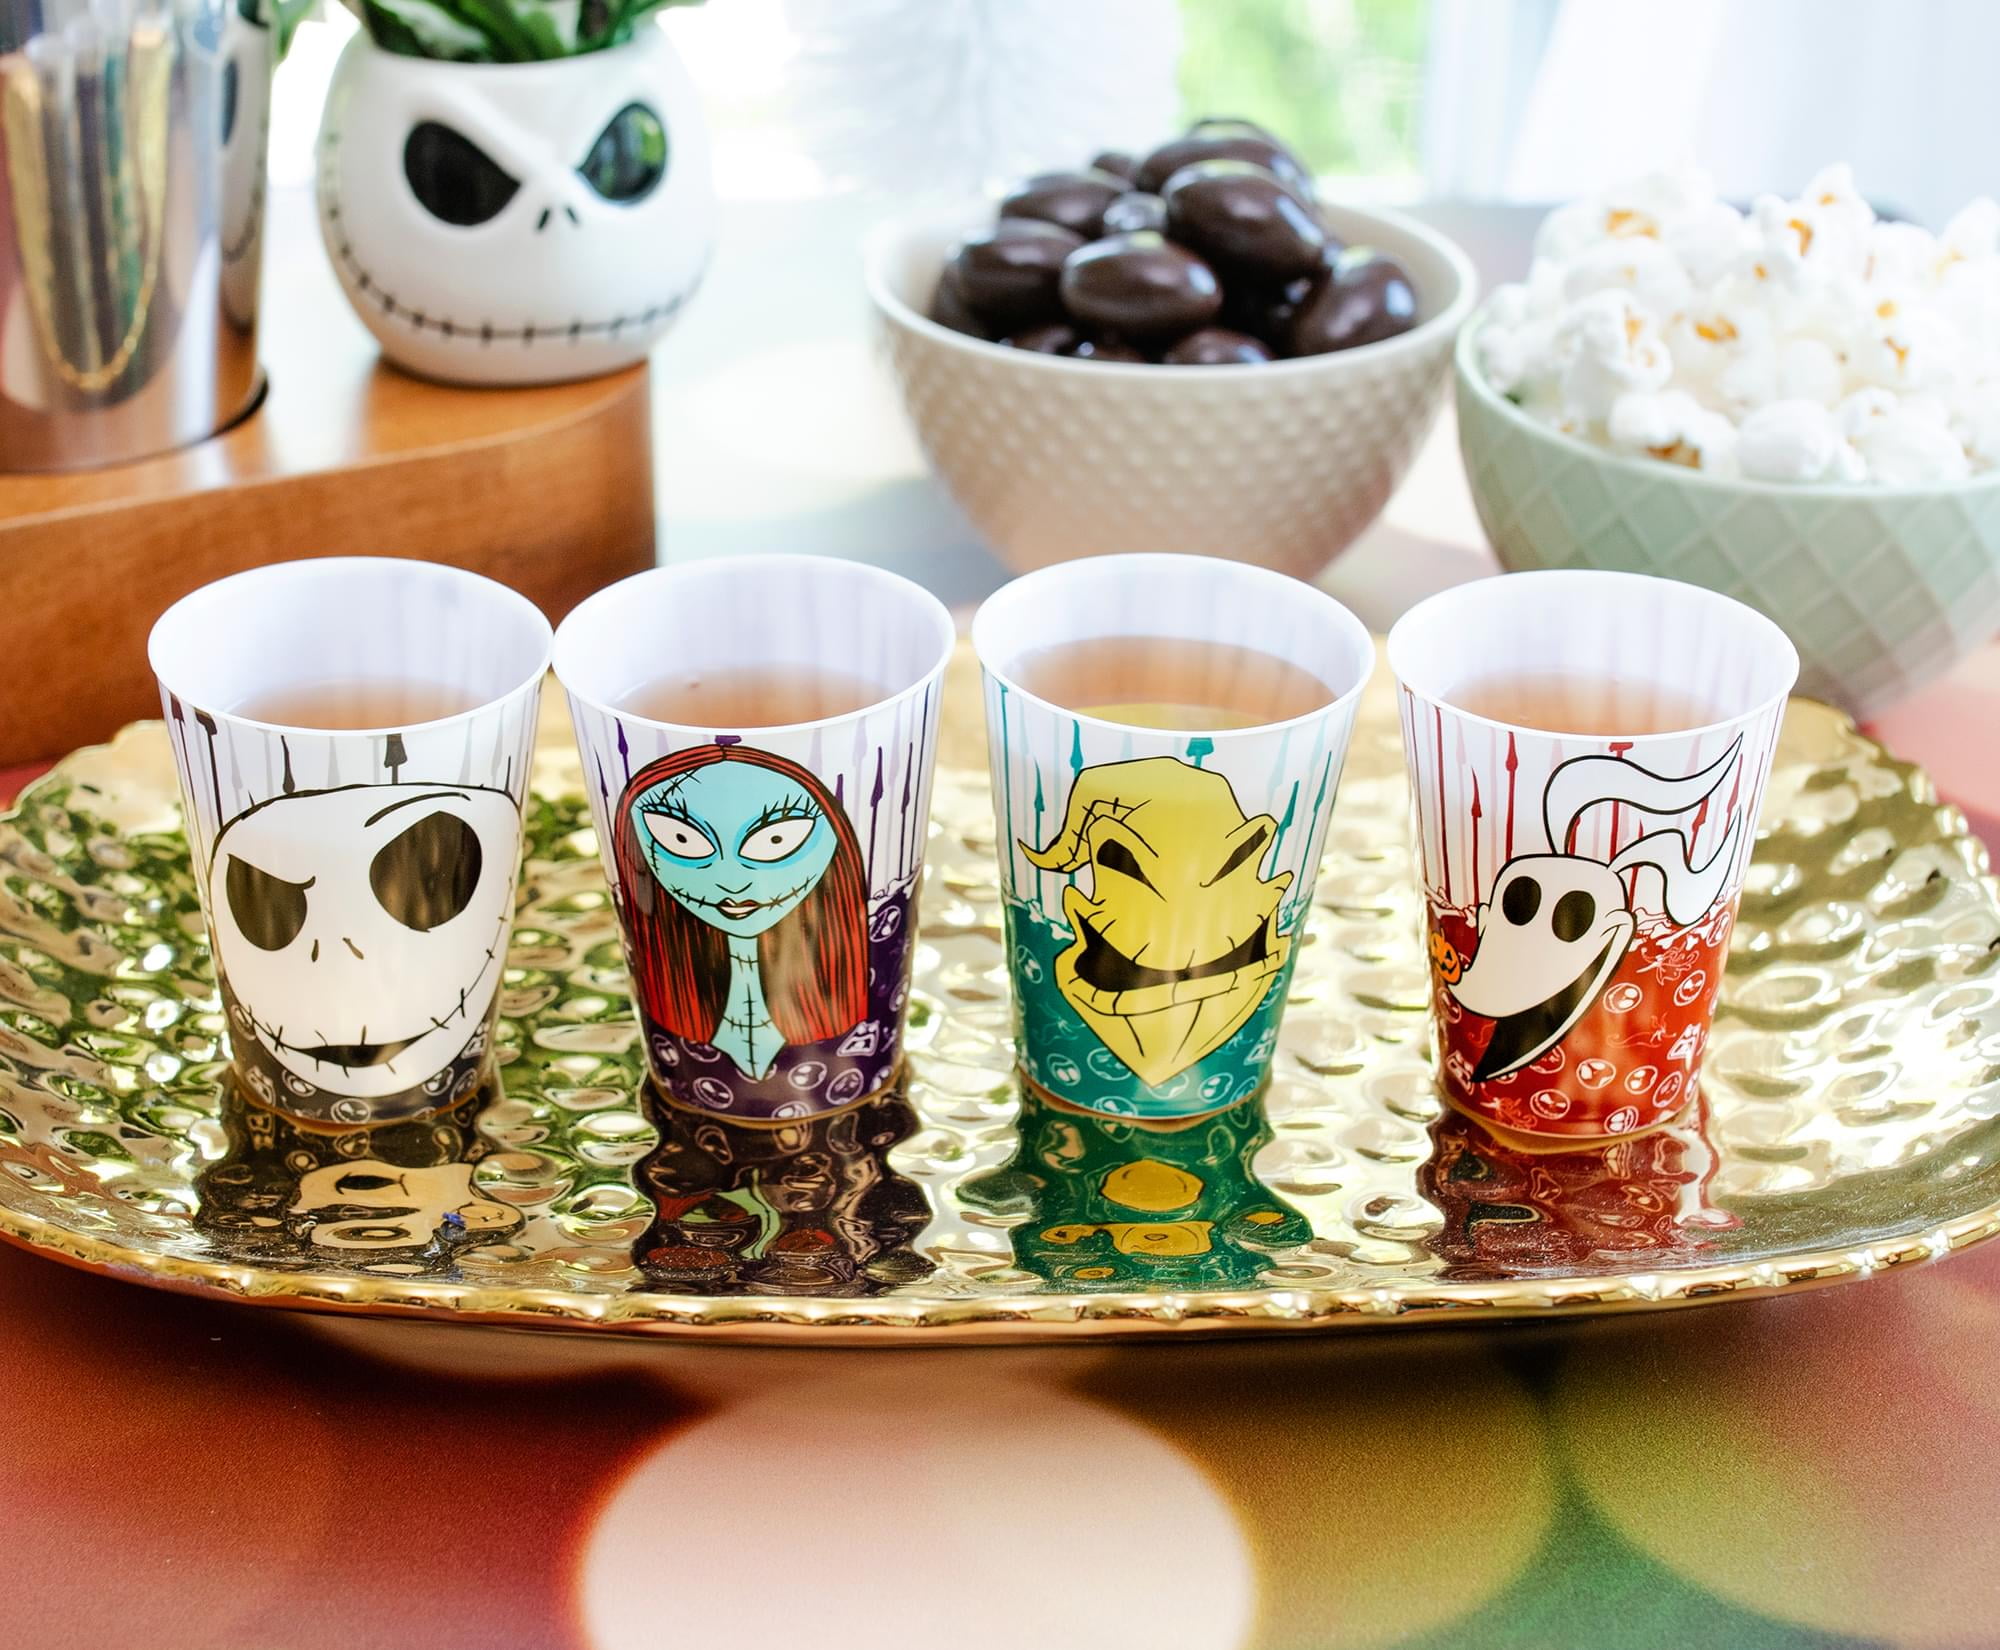 The Nightmare Before Christmas Nesting Measuring Cups